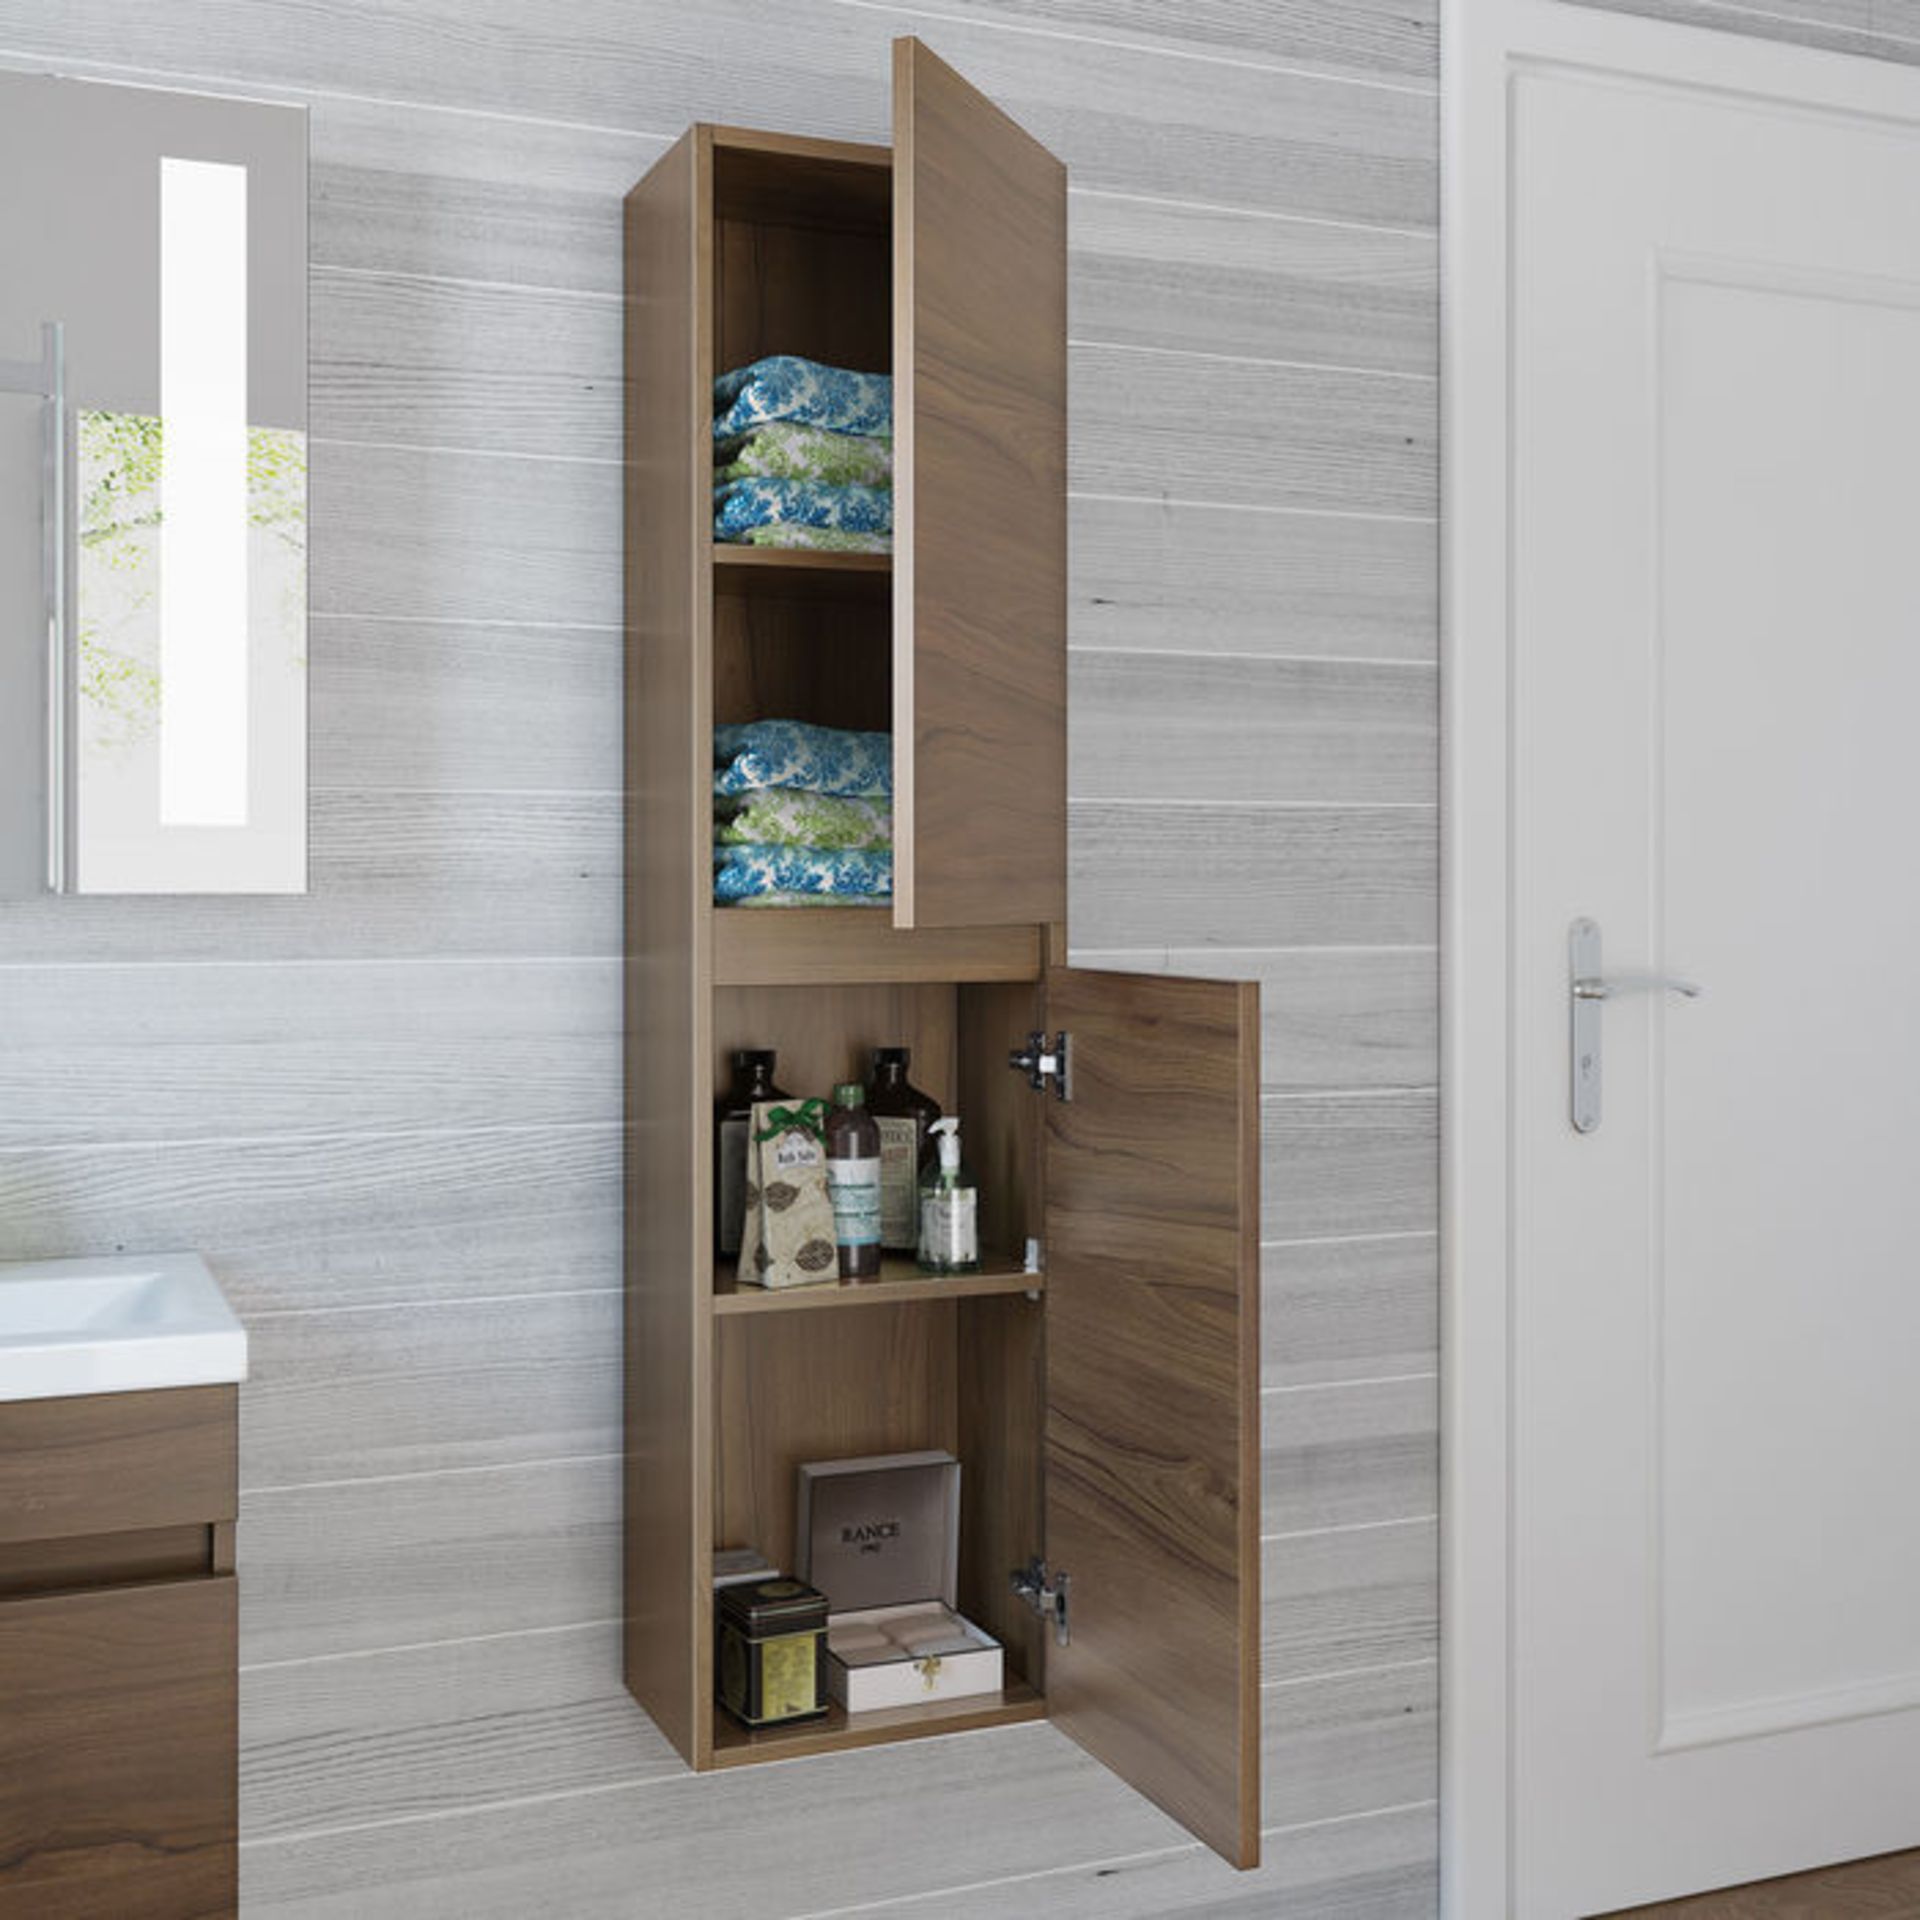 (YC24) Walnut Effect Wall Hung Tall Storage Cabinet. Great practical storage solution with - Image 3 of 3